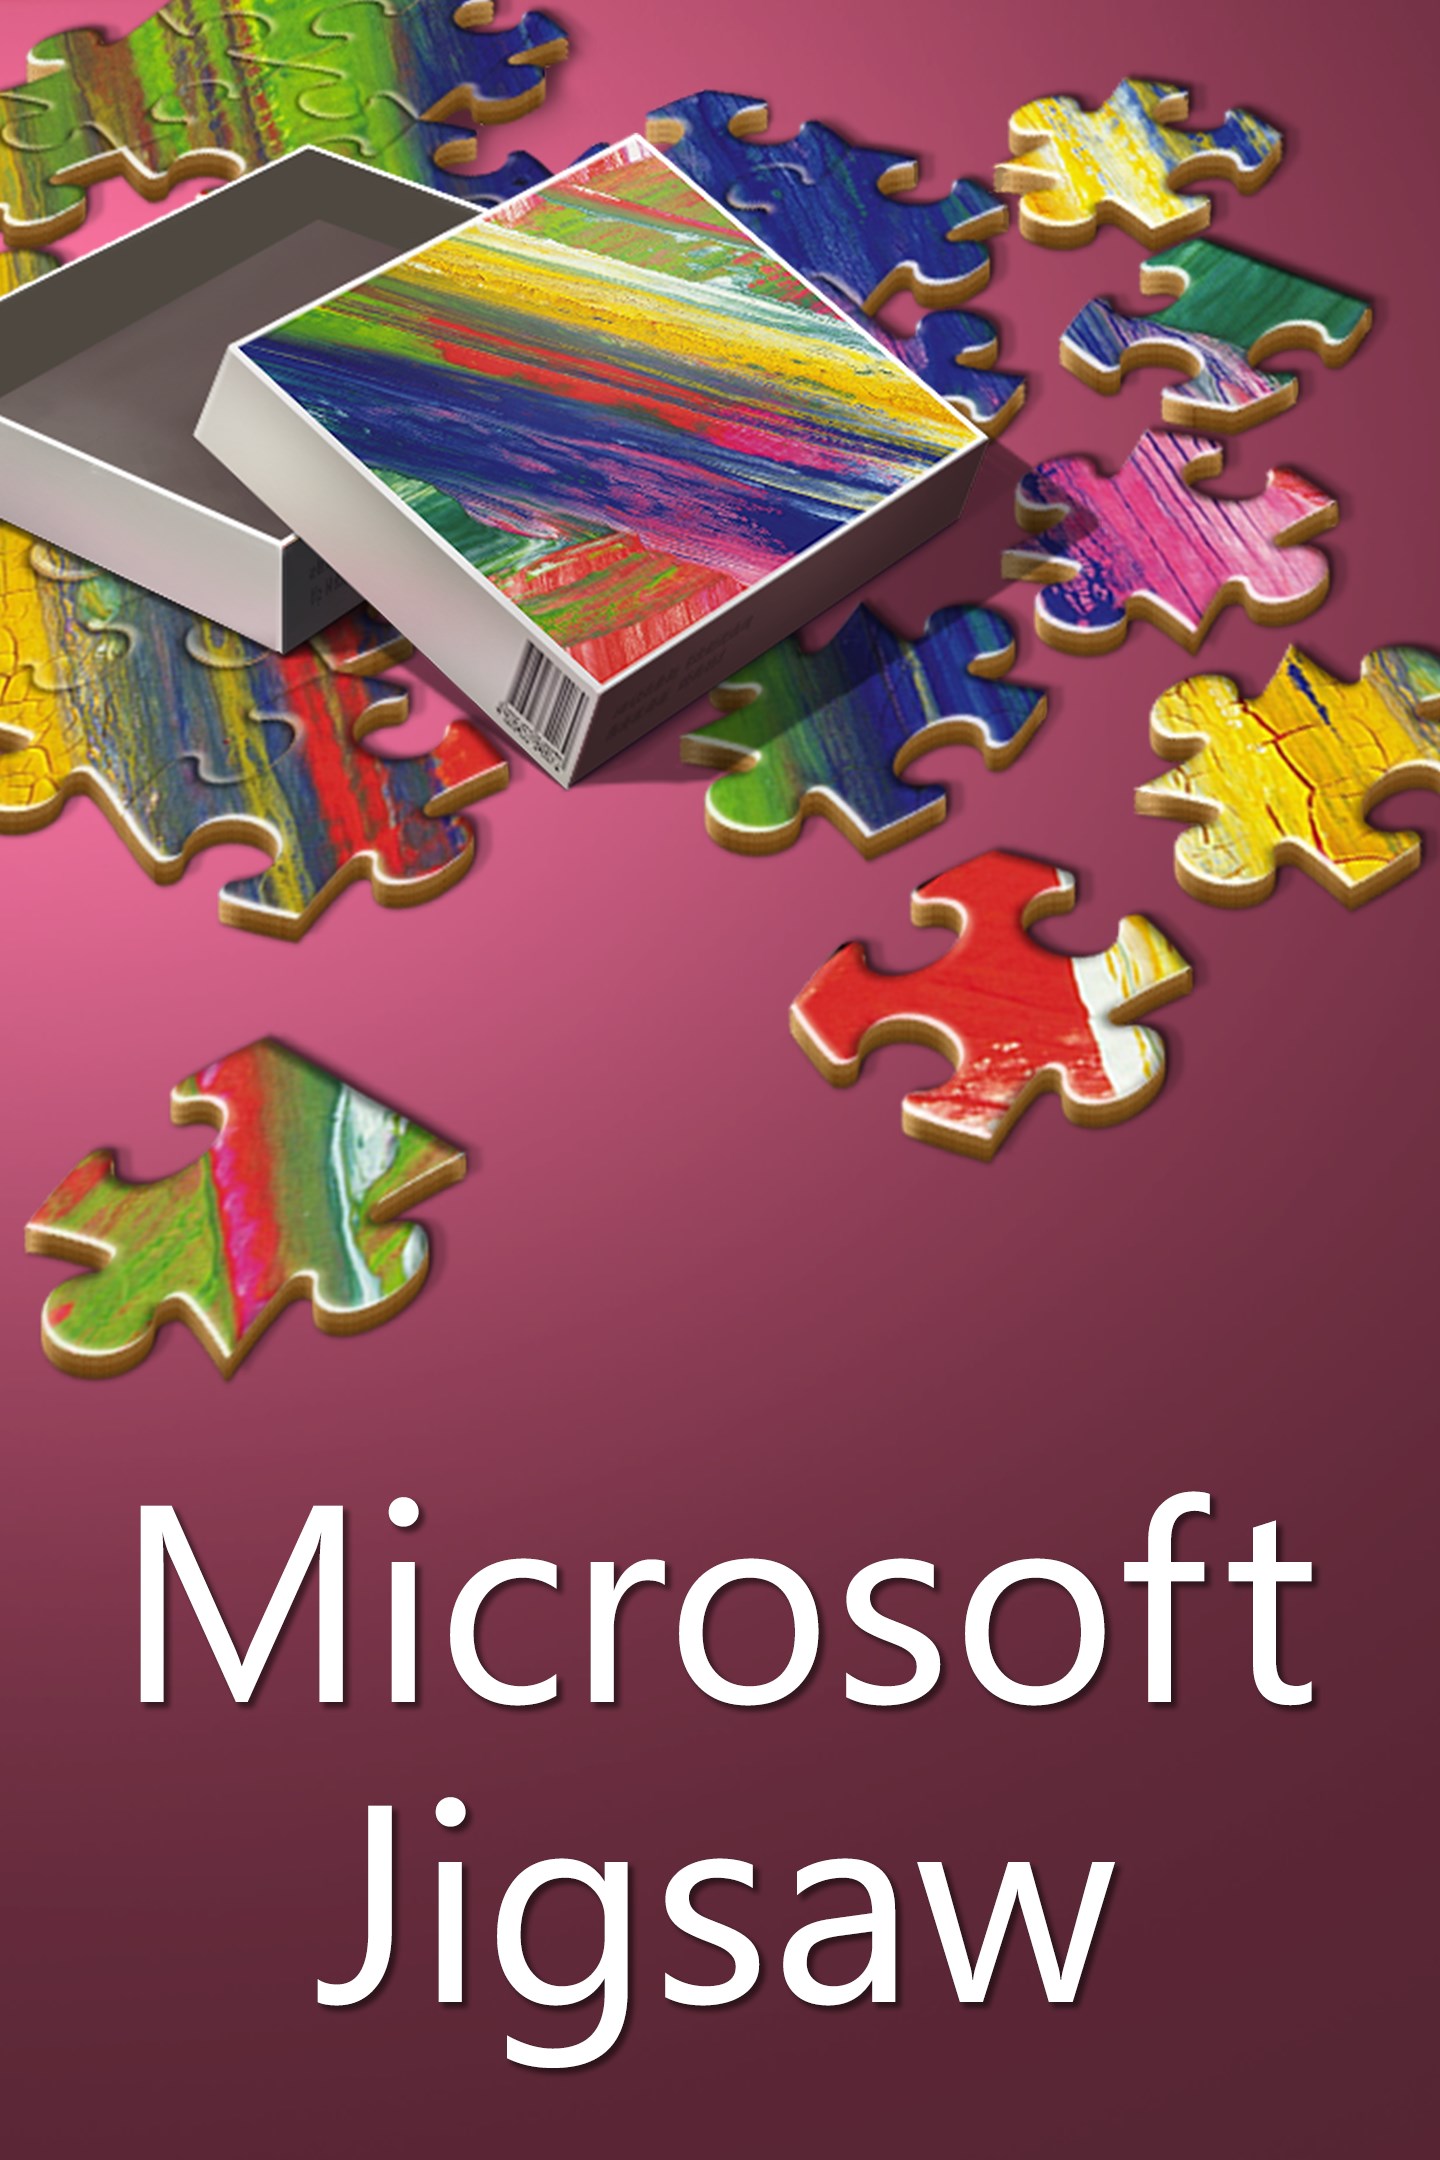 what happened to my jigsaw puzzle on microsoft jigsaw